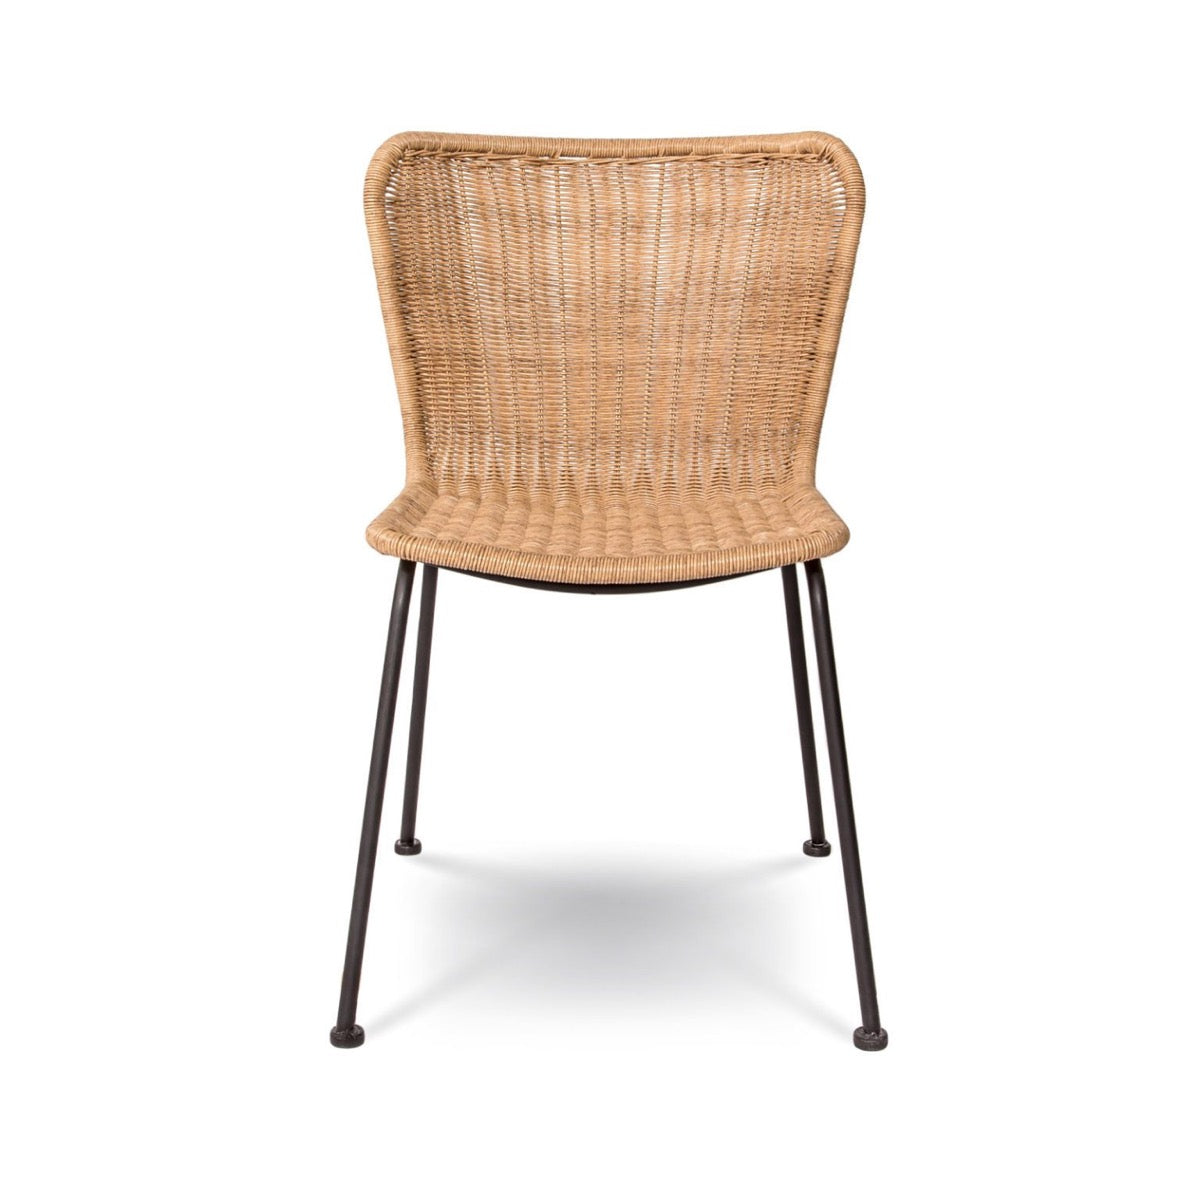 Wicker Dining Chair. Front view.